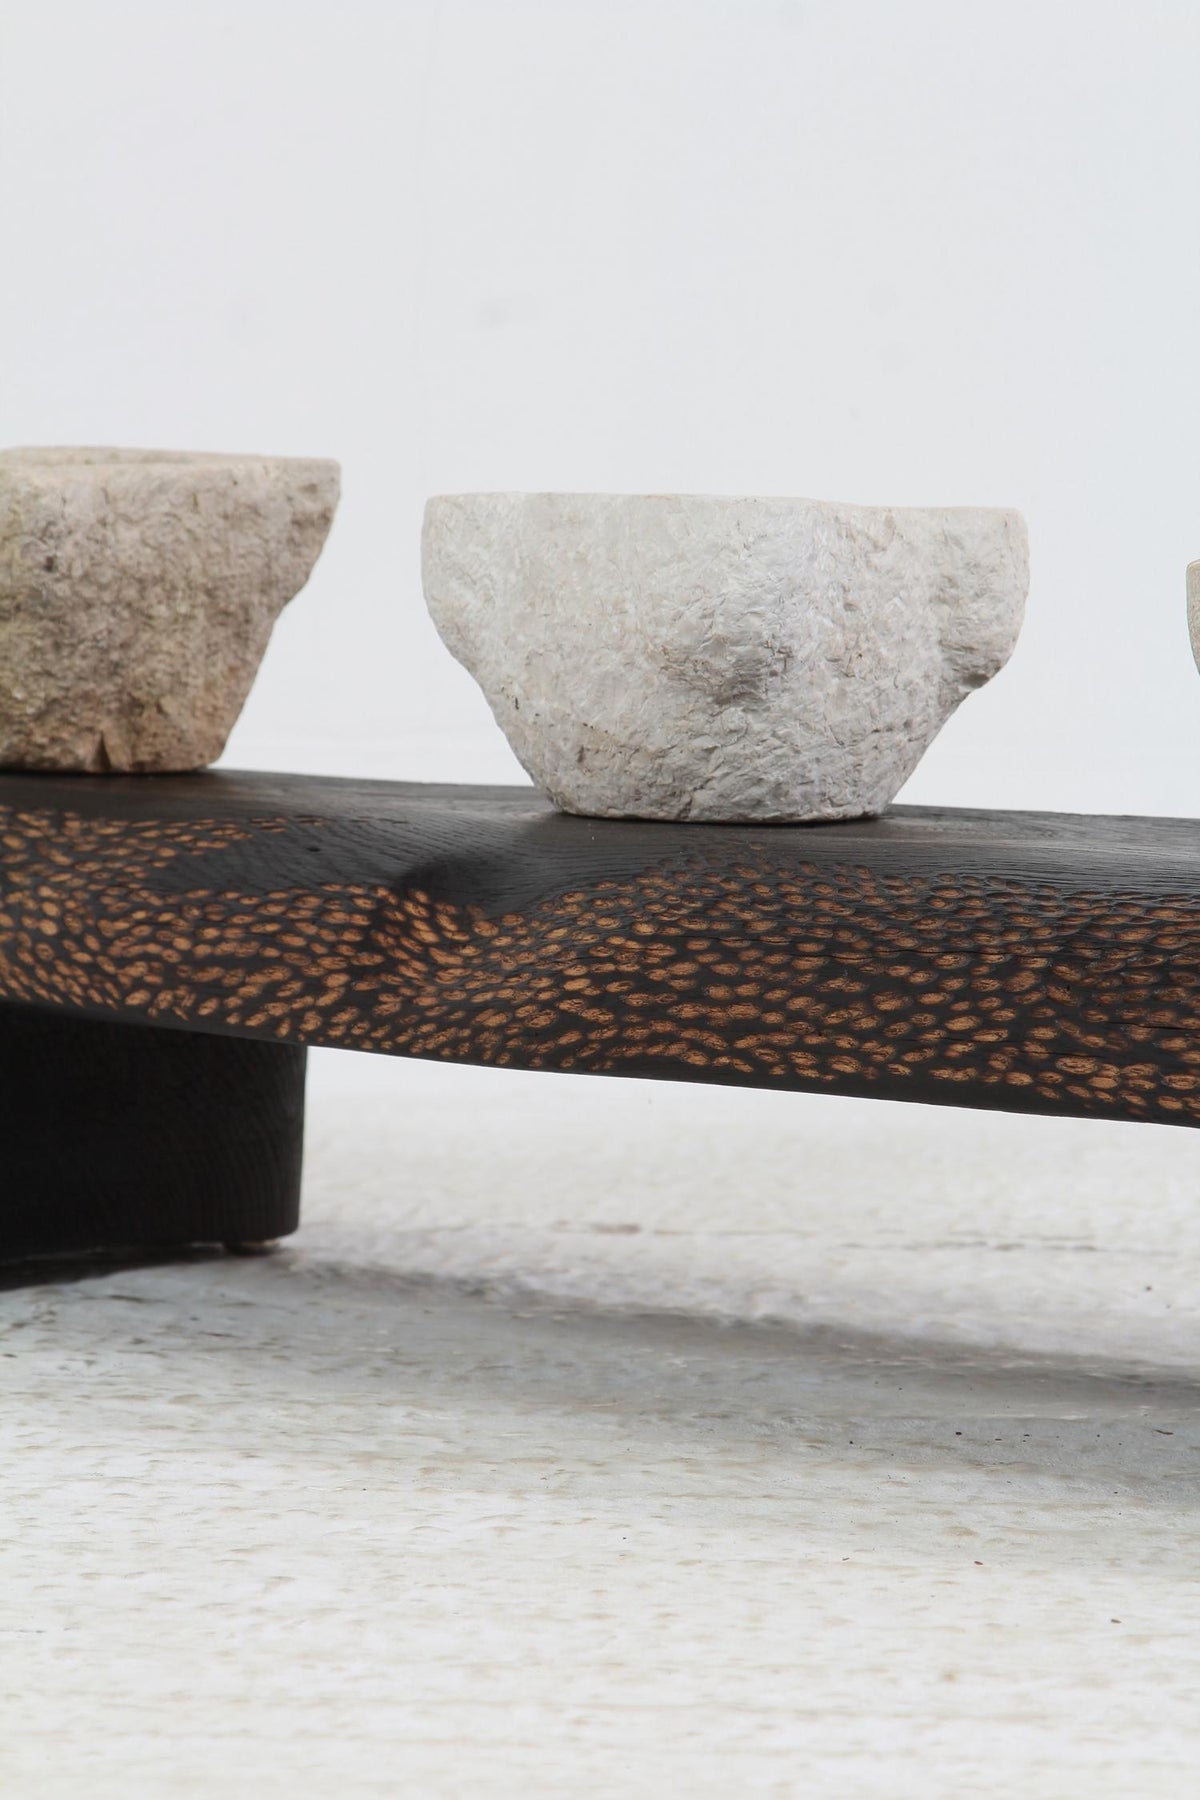 ARTISAN OAK LOW ORIENTAL INSPIRED DECORATED BURNT WOOD COFFEE TABLE.PRICE ON REQUEST